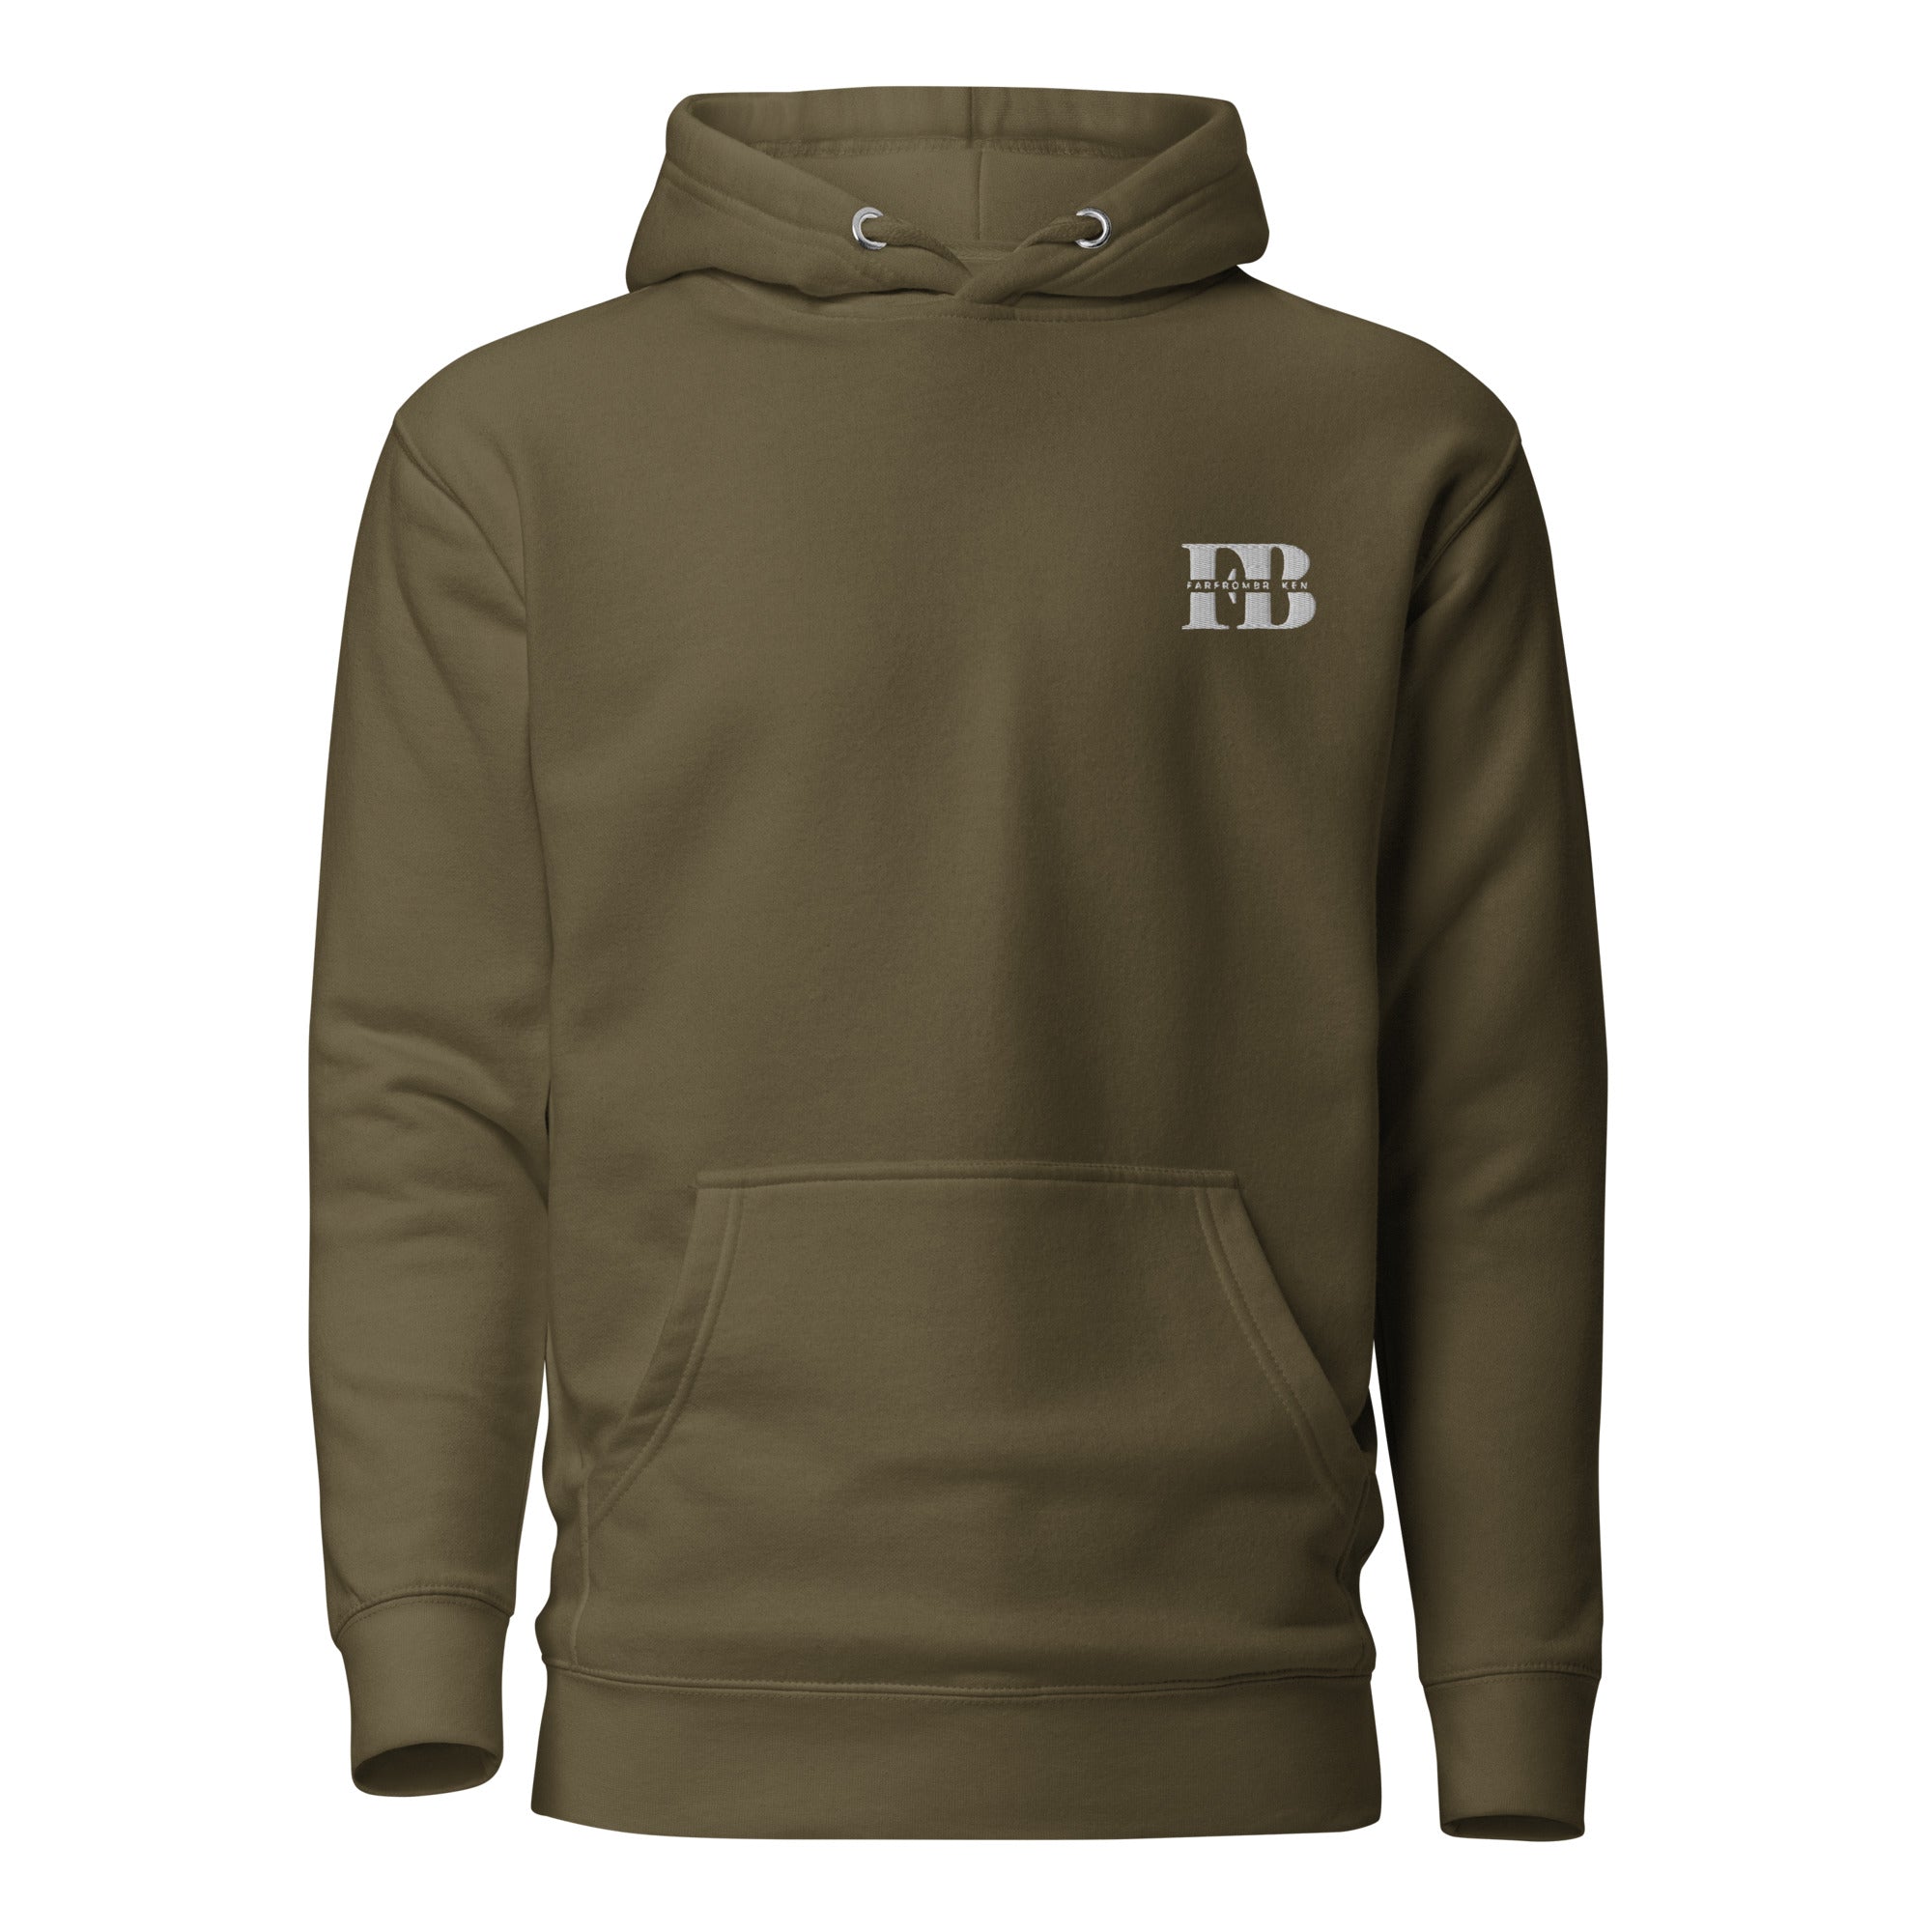 FFB Embroidered Hoodie - Military Green